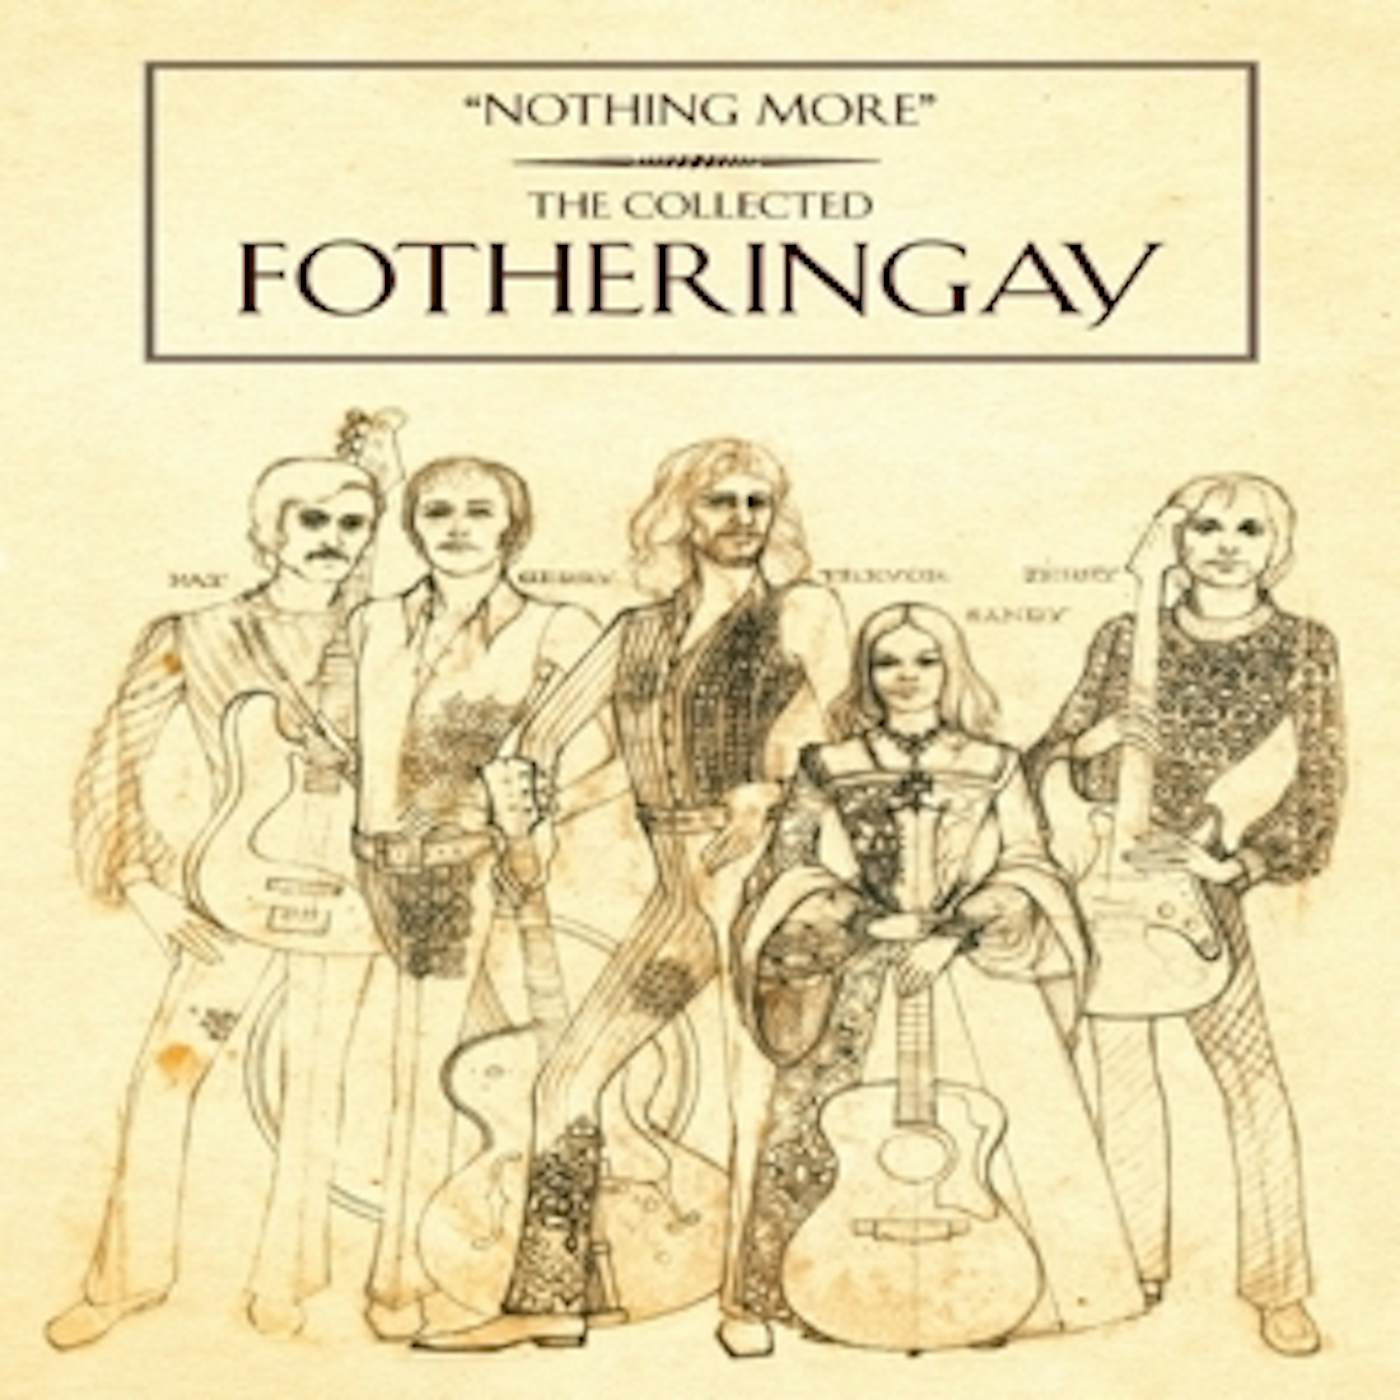 Fotheringay NOTHING MORE-THE COLLECTED CD